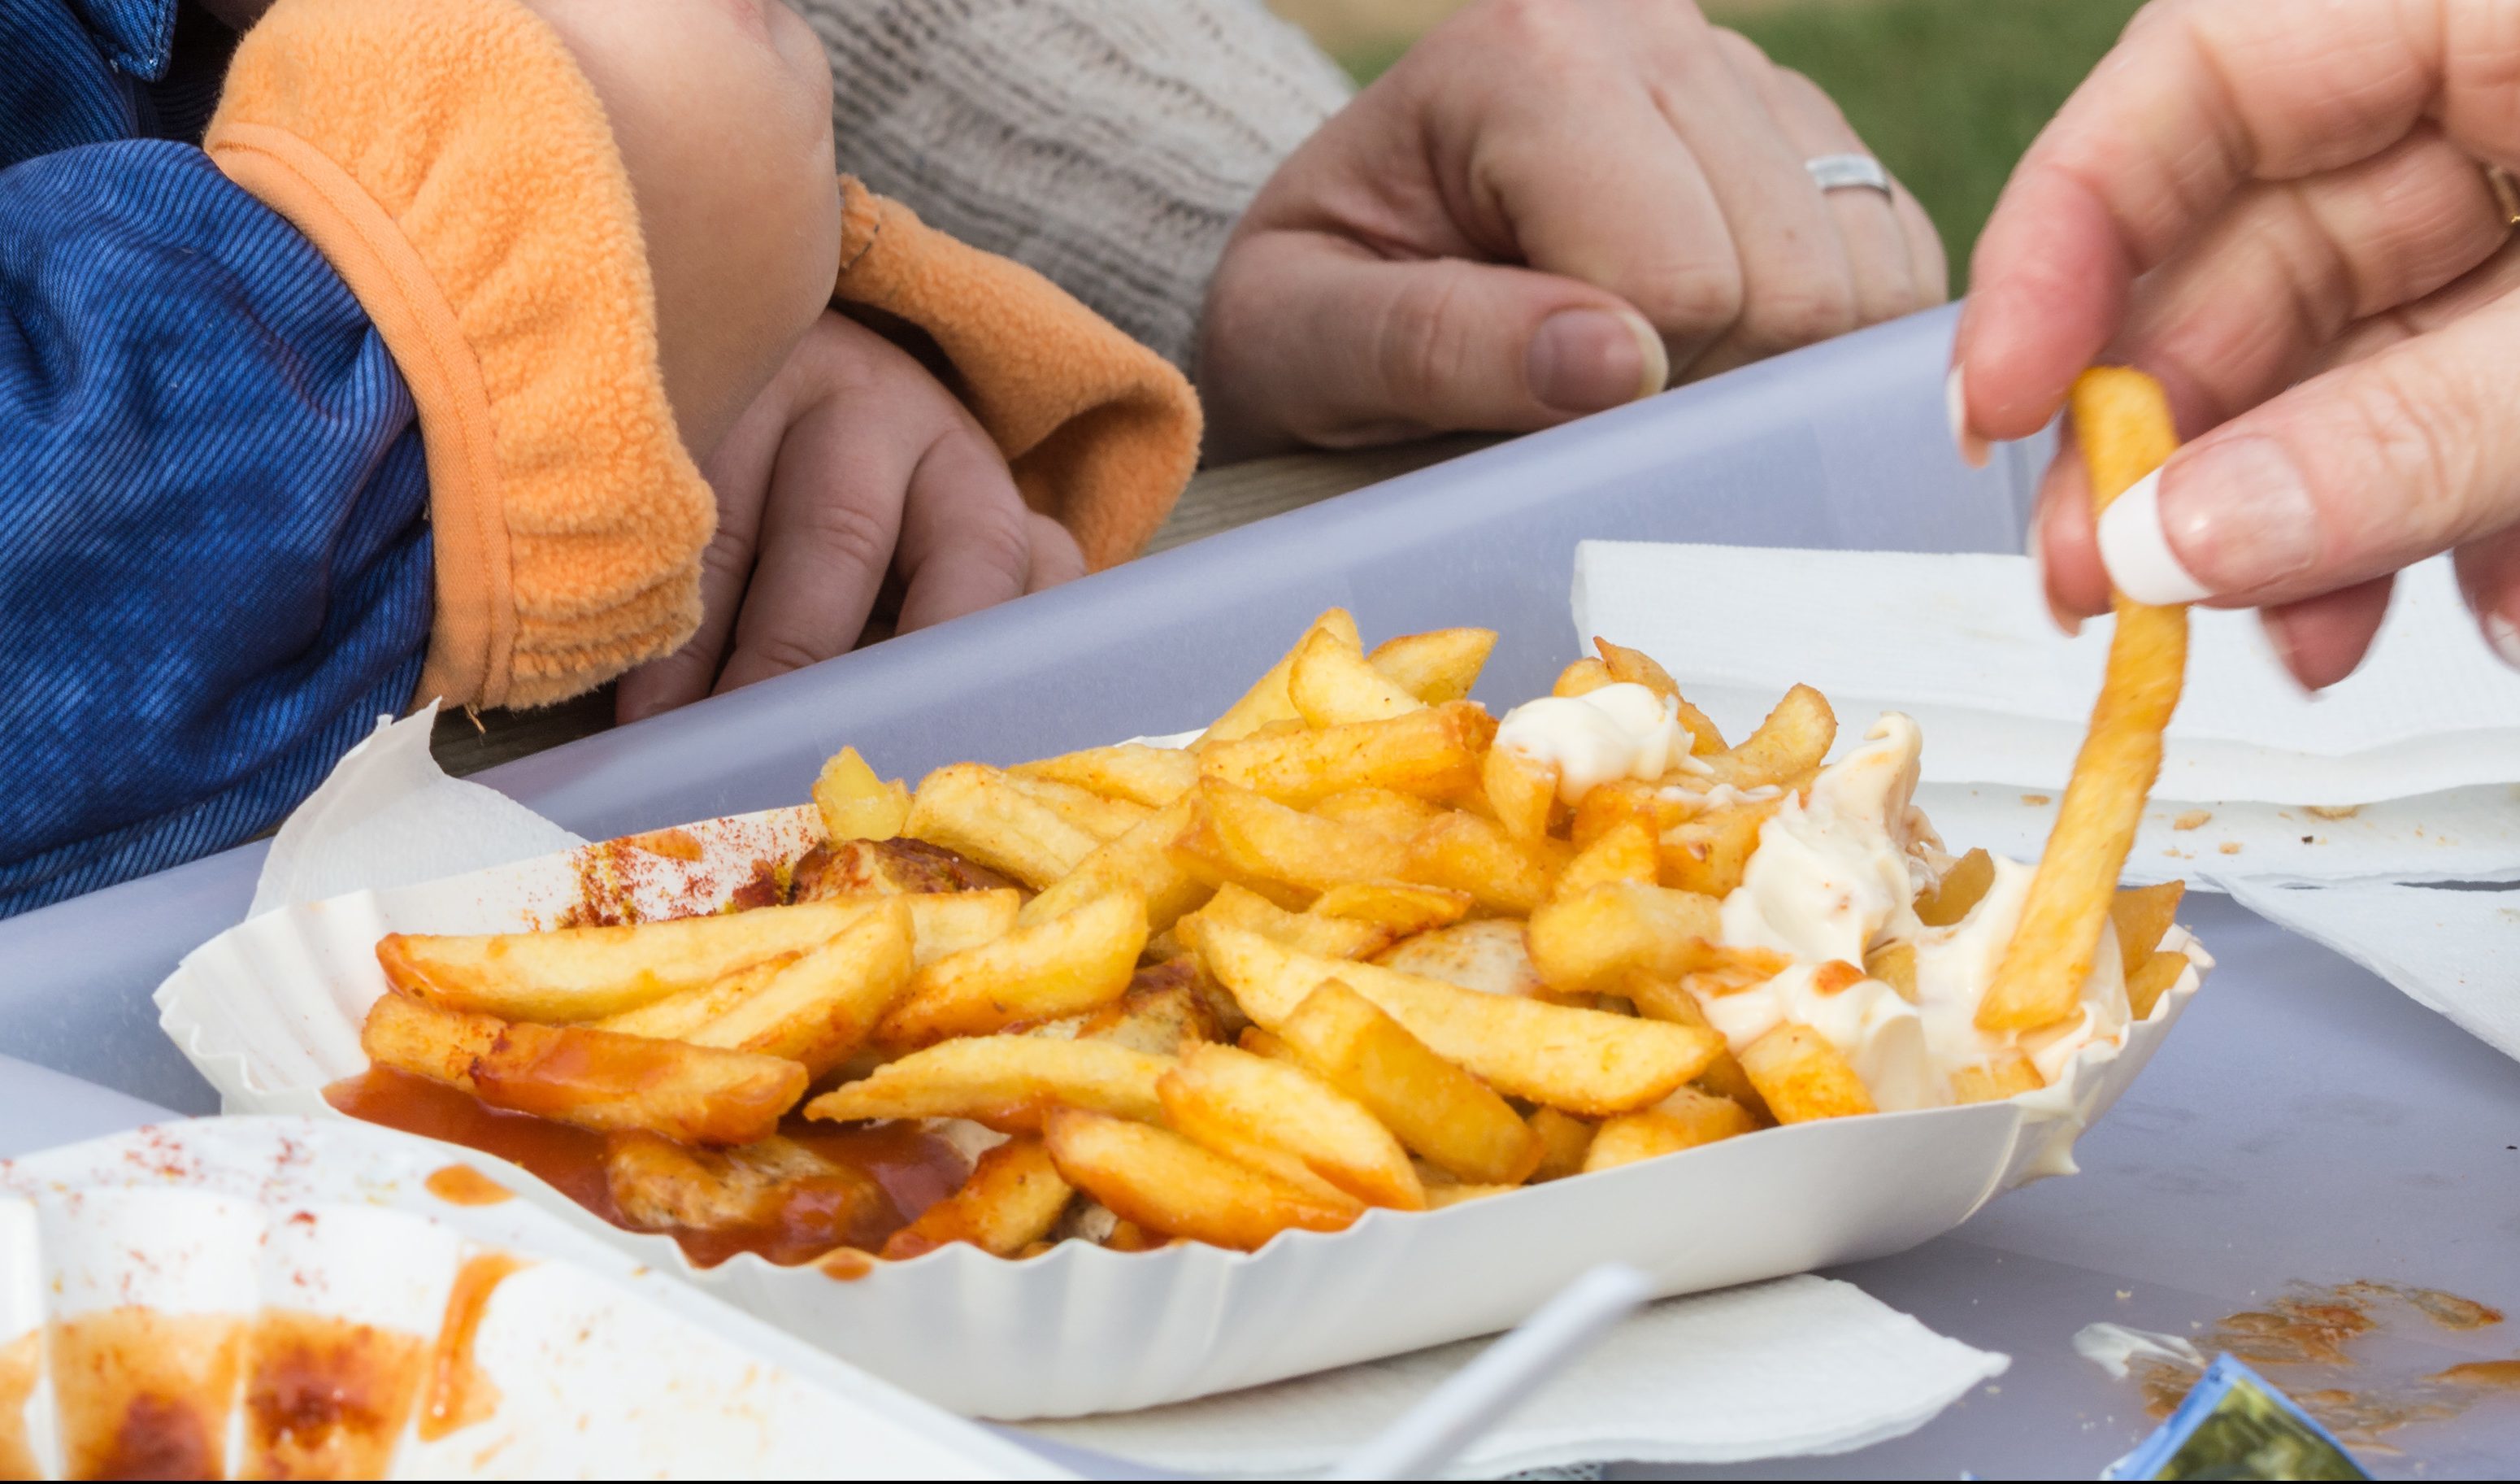 An NHS Health Scotland report found the obesity risk for children is widening (iStock)